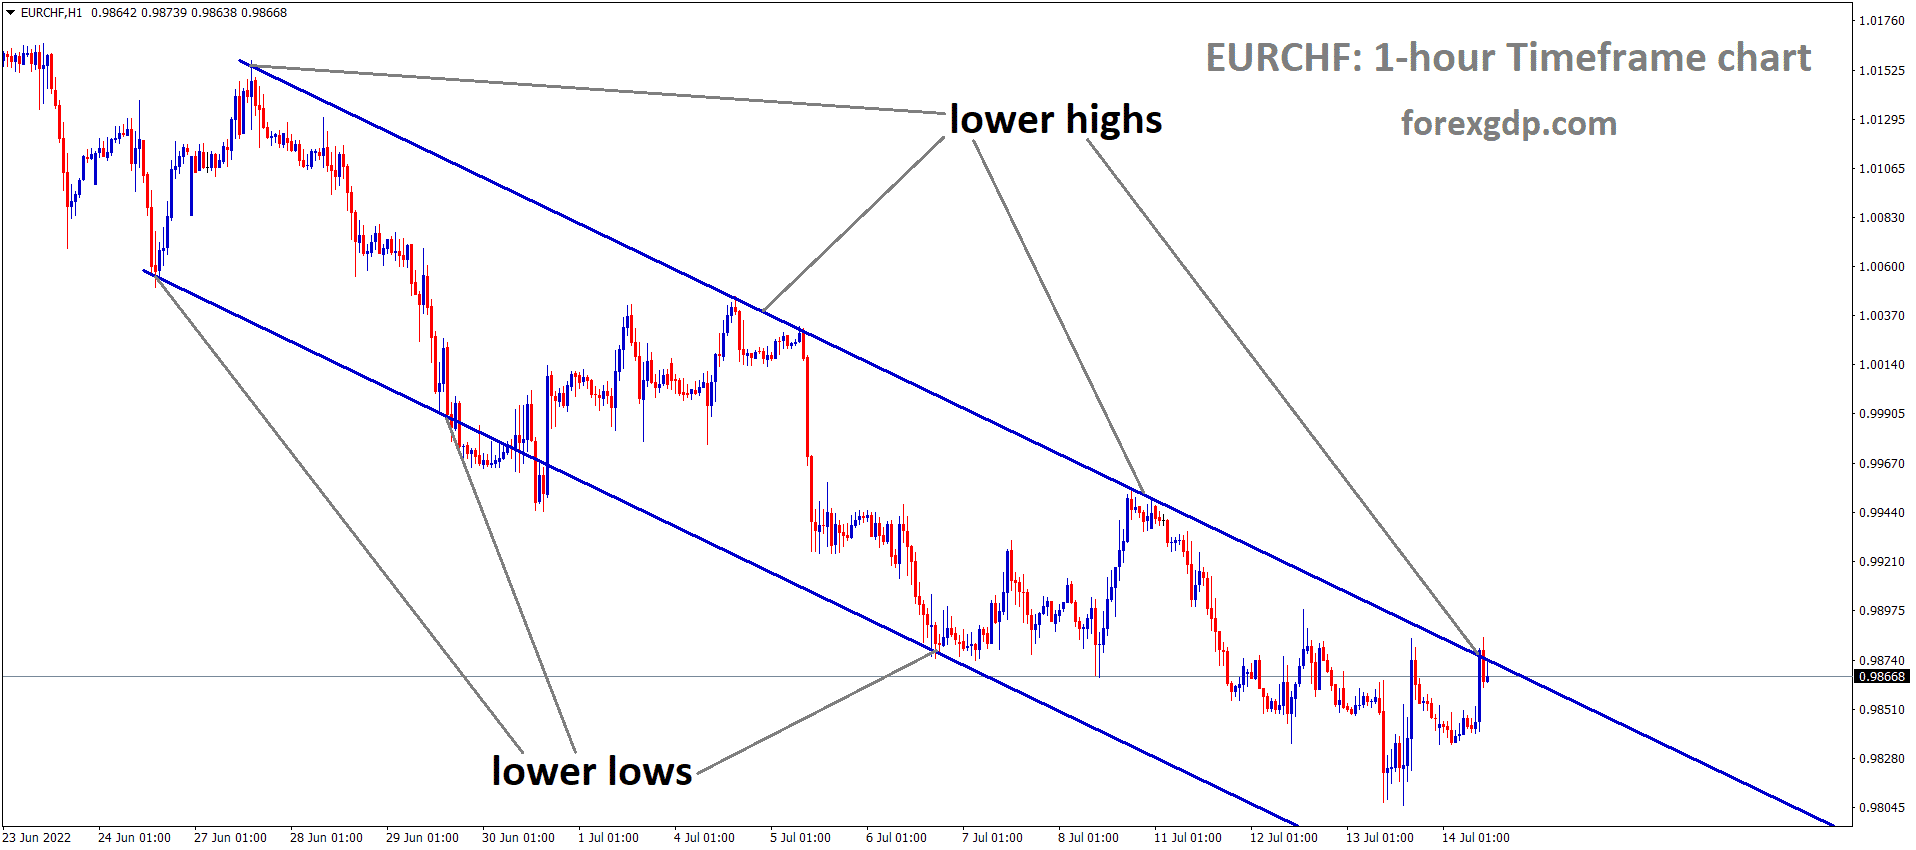 EURCHF is moving in the Descending channel and the market has reached the Lower high area of the channel.